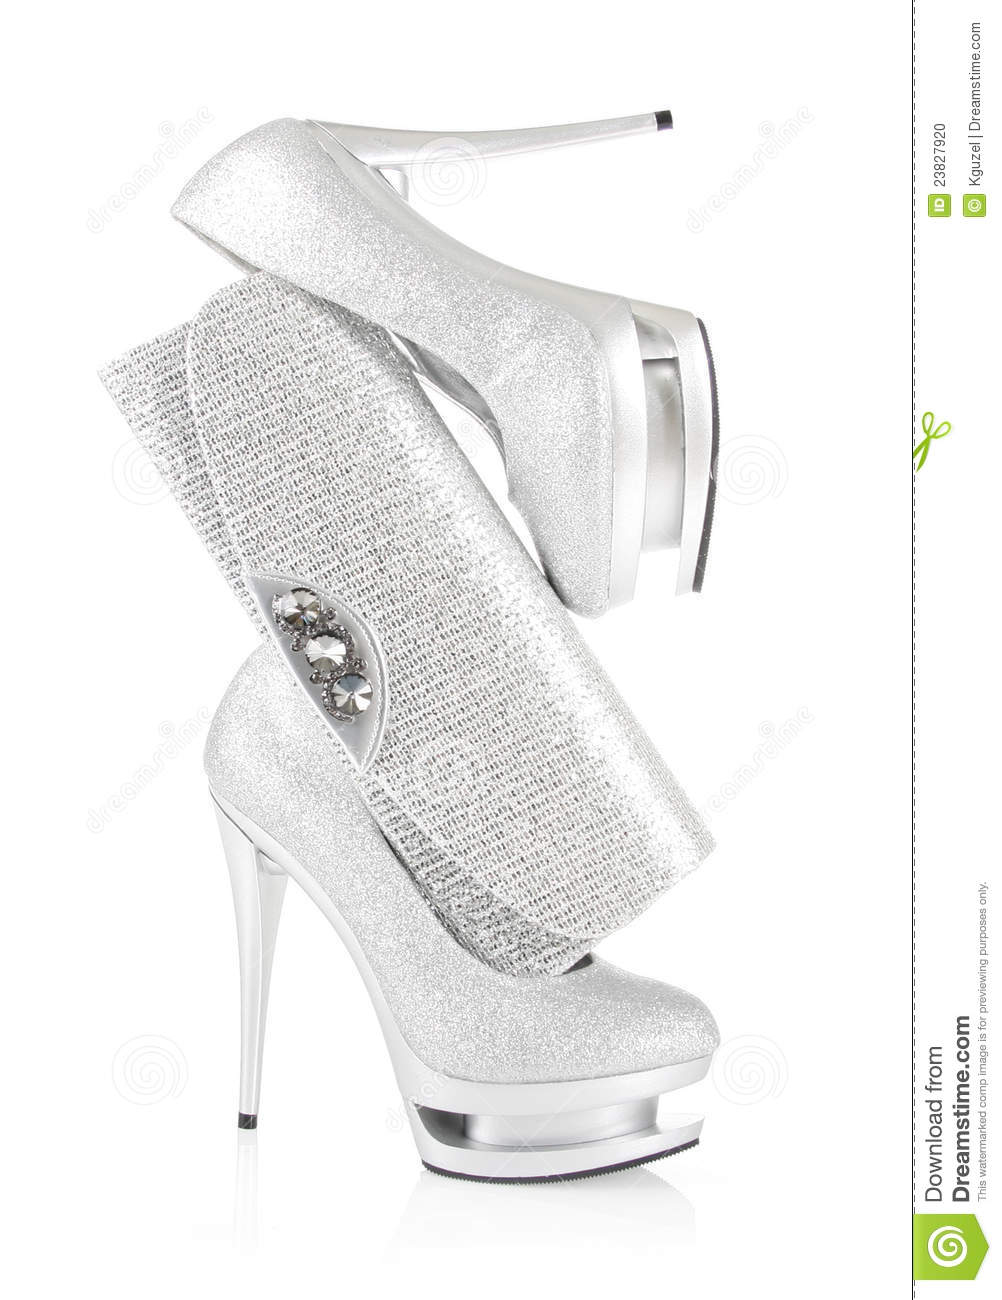 Glitter Silver Shoes And Clutch Bag Stock Photo   Image  23827920